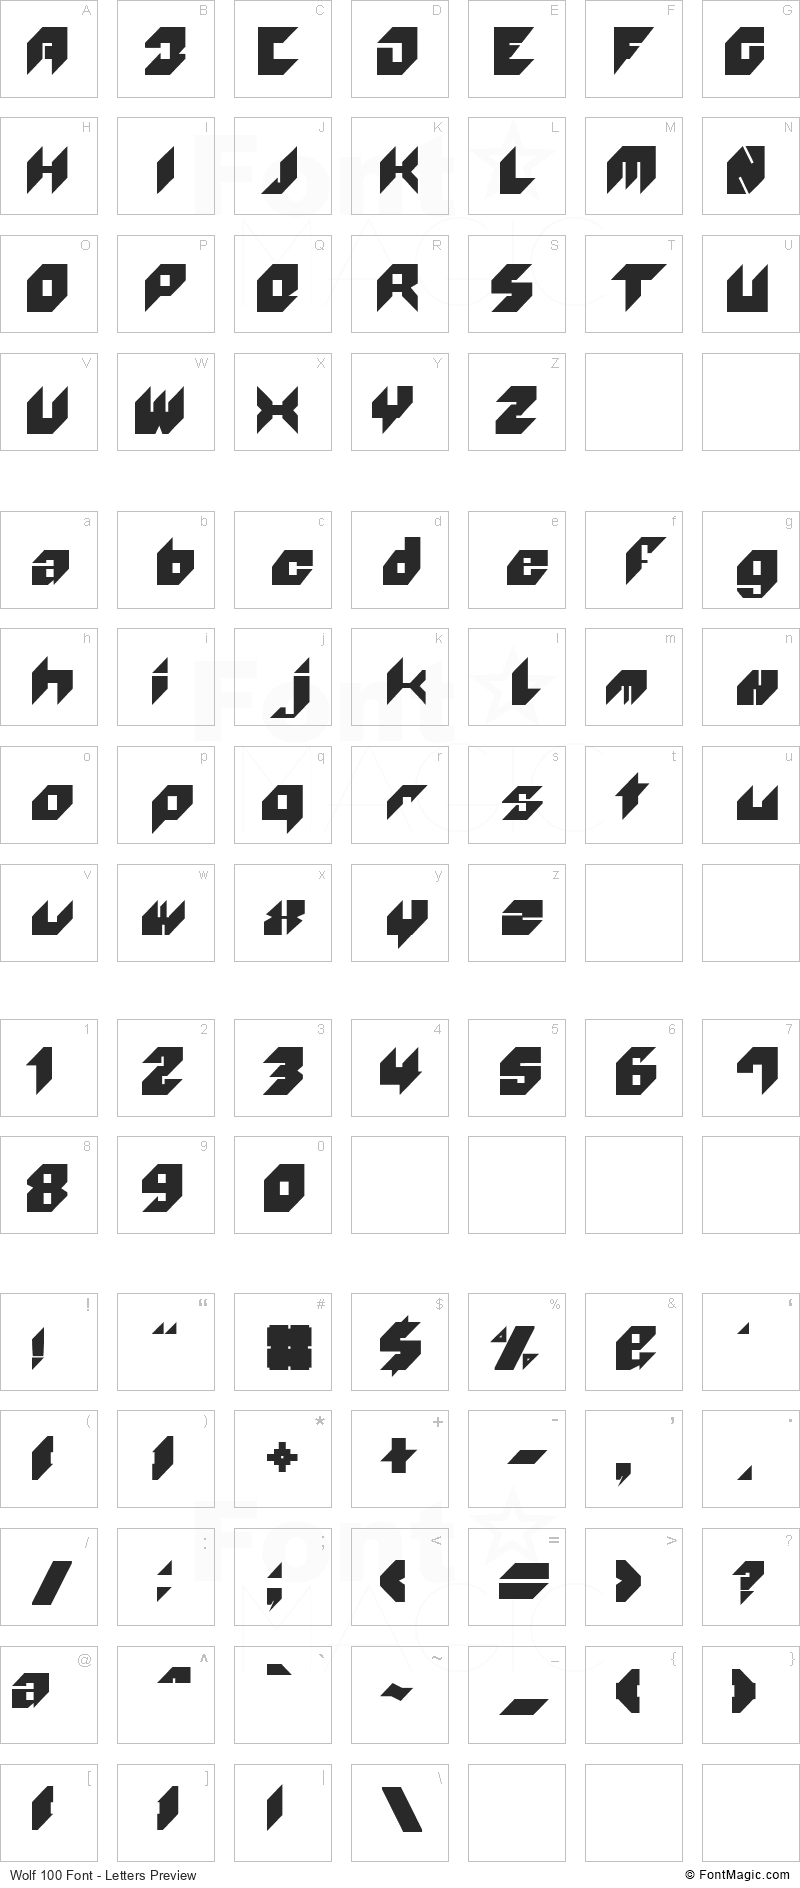 Wolf 100 Font - All Latters Preview Chart